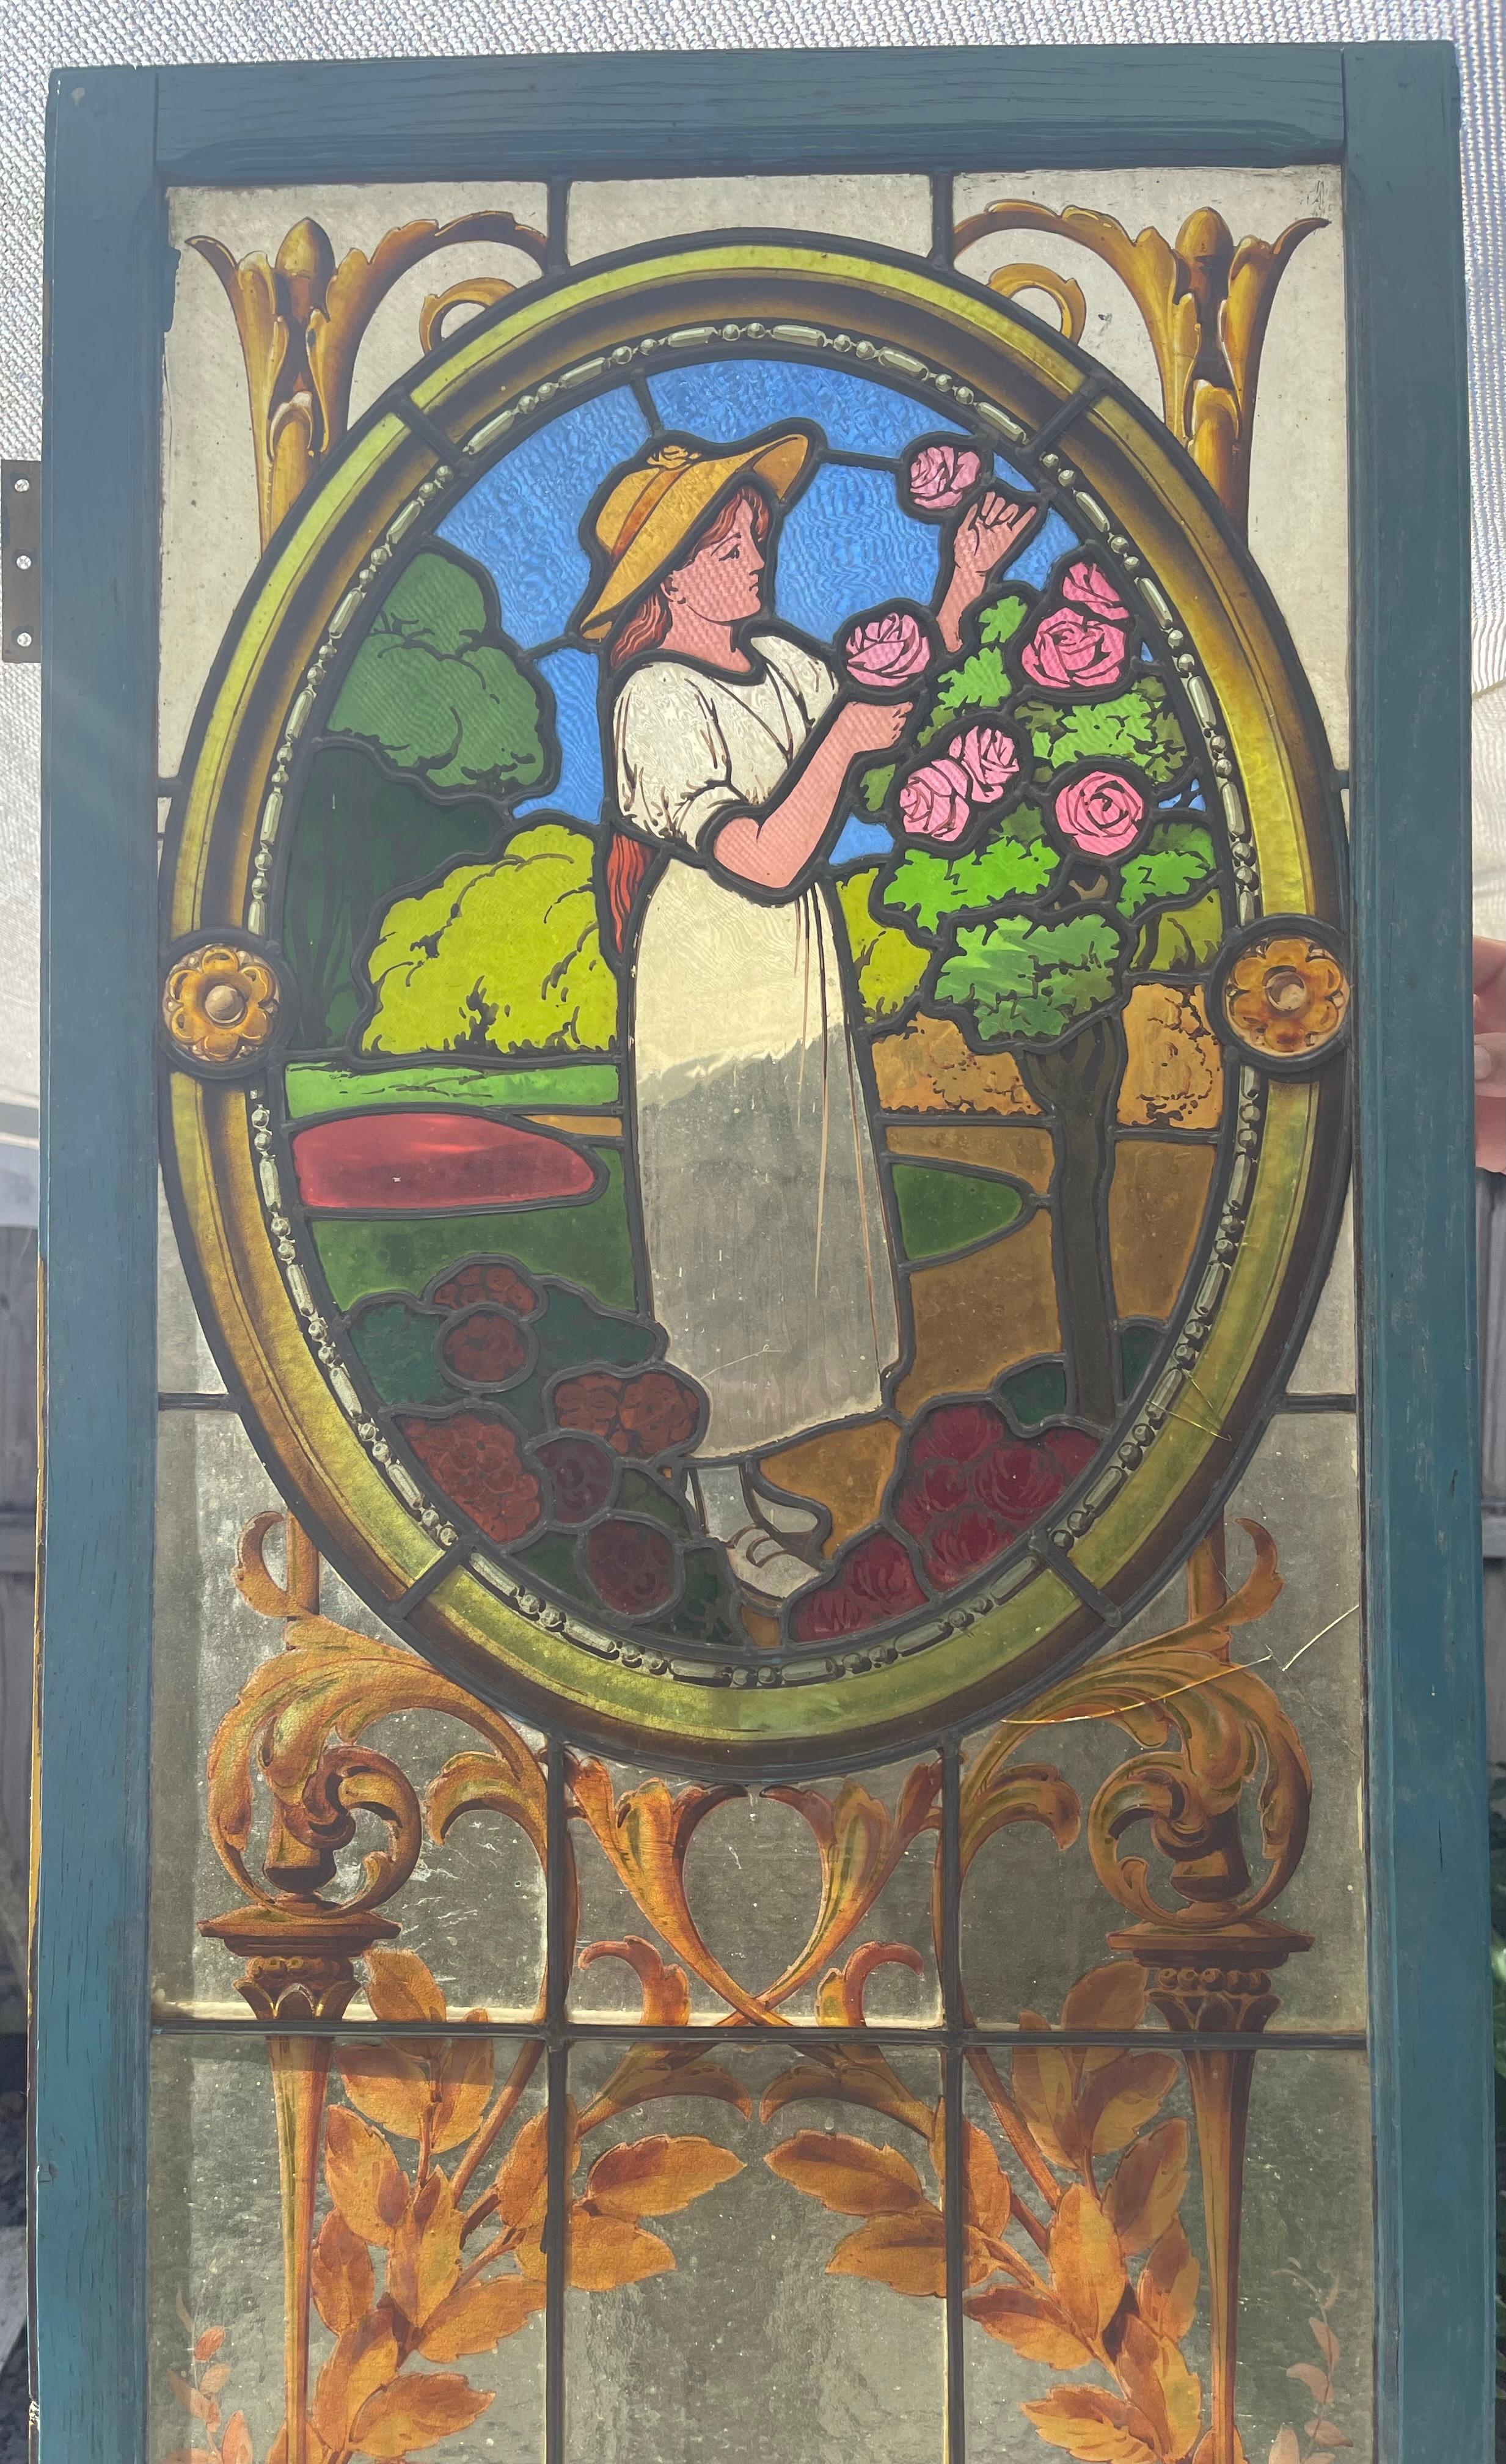 Beautiful old stained glass window from 1890 representing a countryside scene. At its base, a work of glass in the form of a shell reveals a vase and its acanthus leaves. On the top of the panel, a women picking up some roses , all made of different